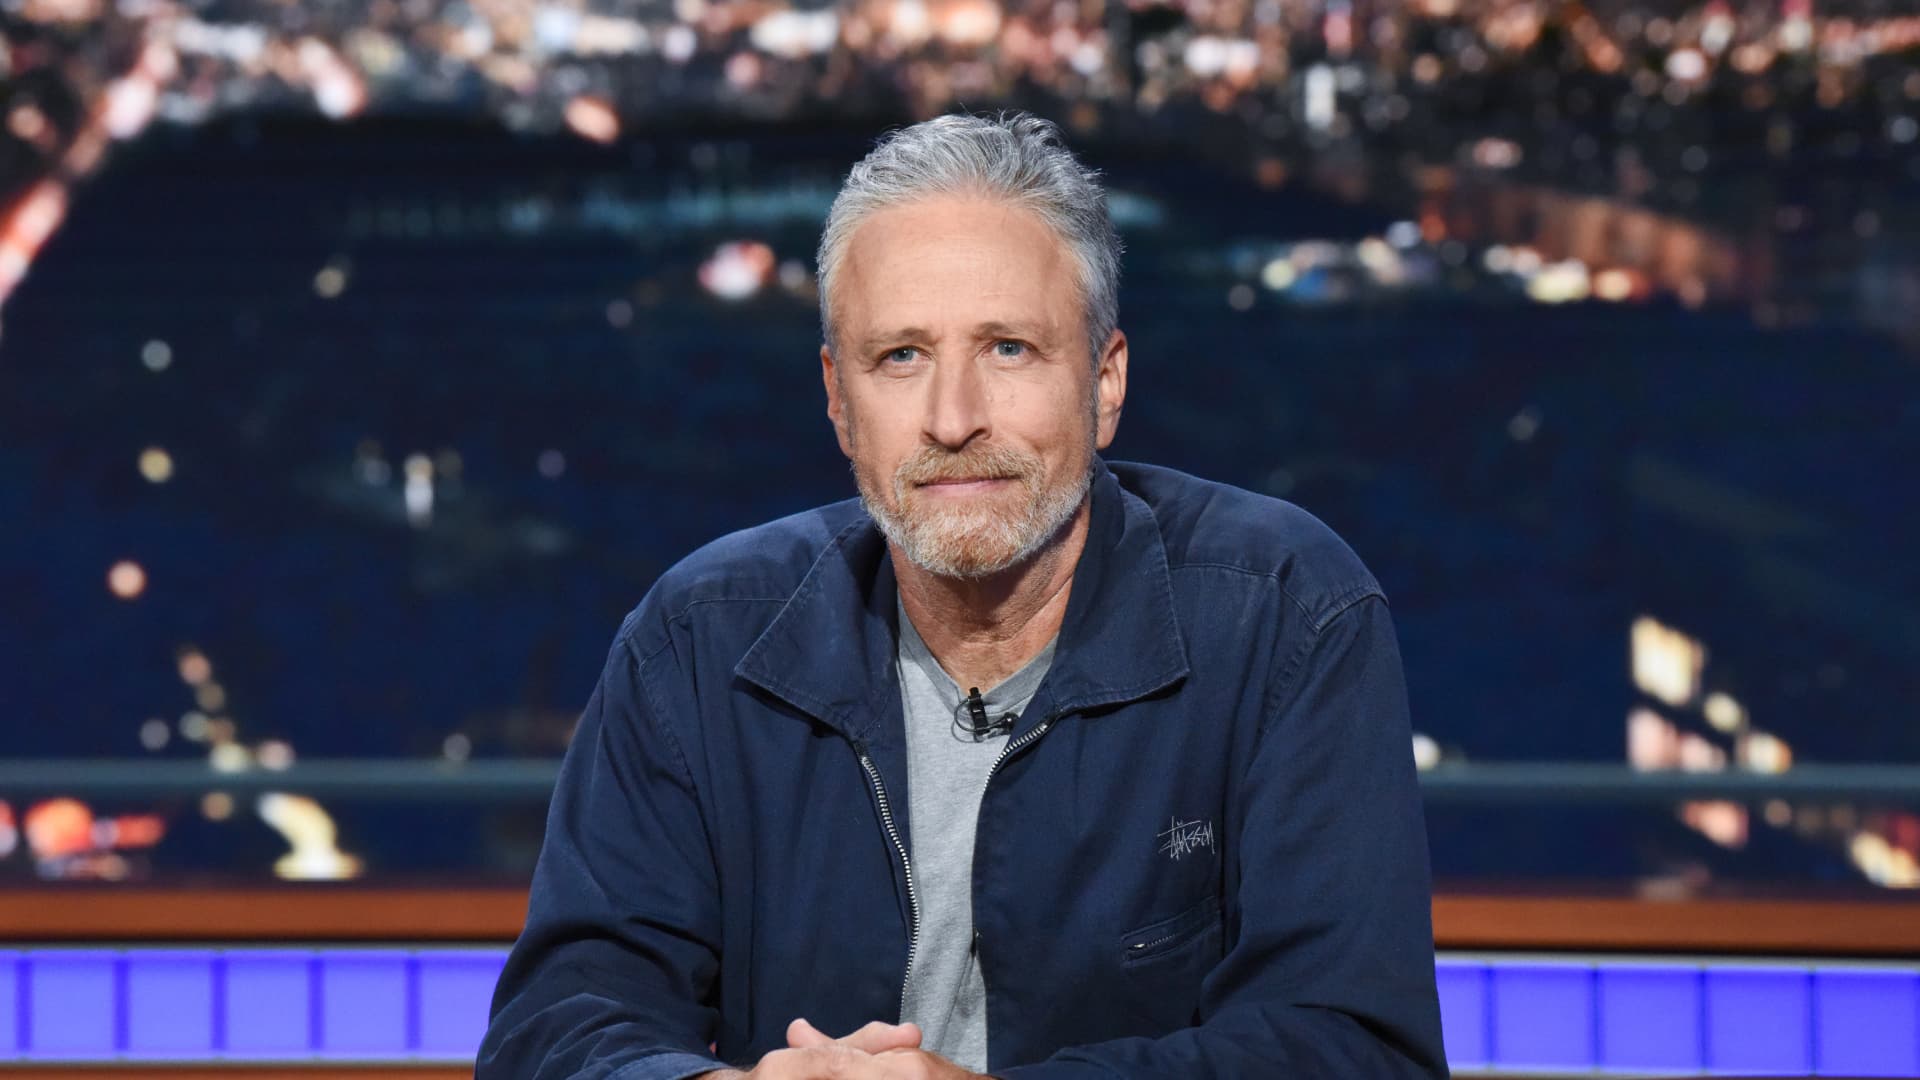 Comedian Jon Stewart says Apple asked him not to interview FTC Chair Lina Khan